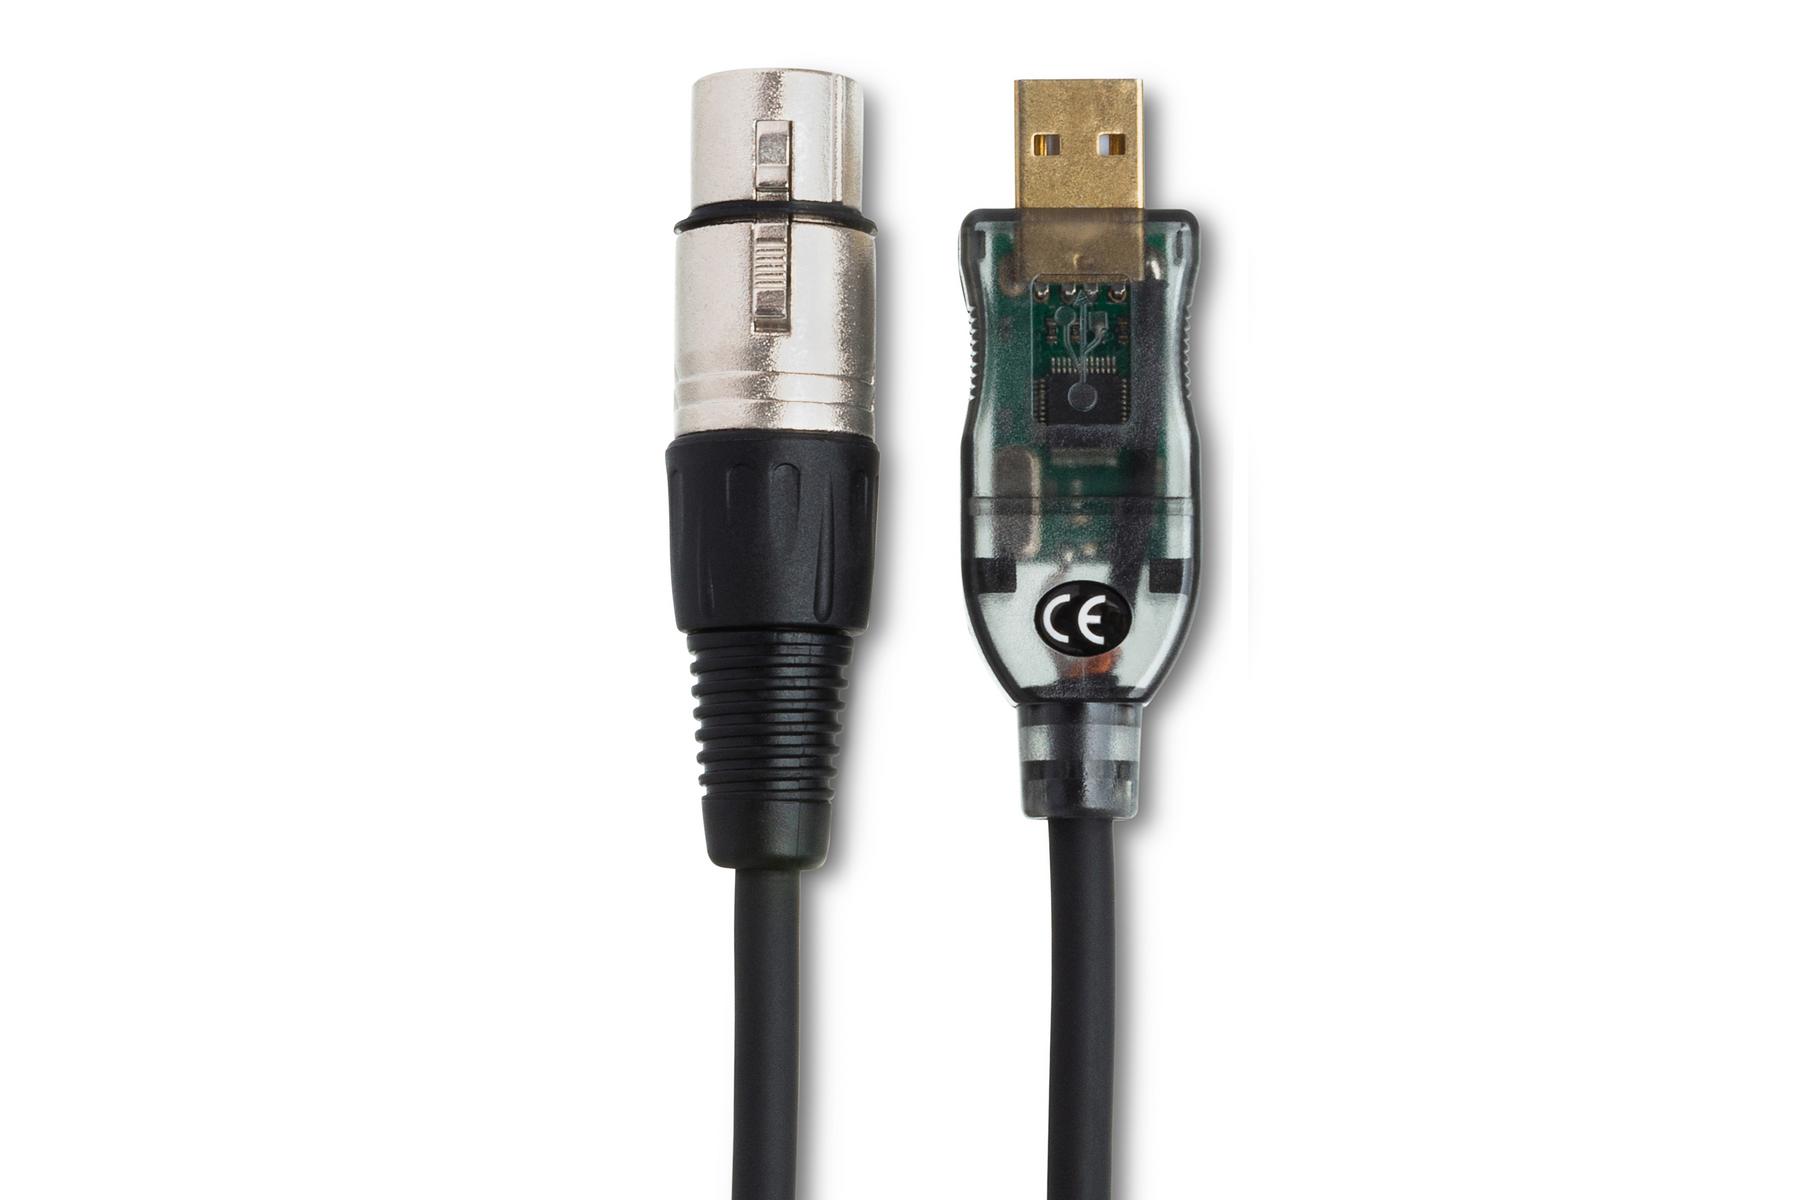 Should You Buy an XLR to USB Cable? 